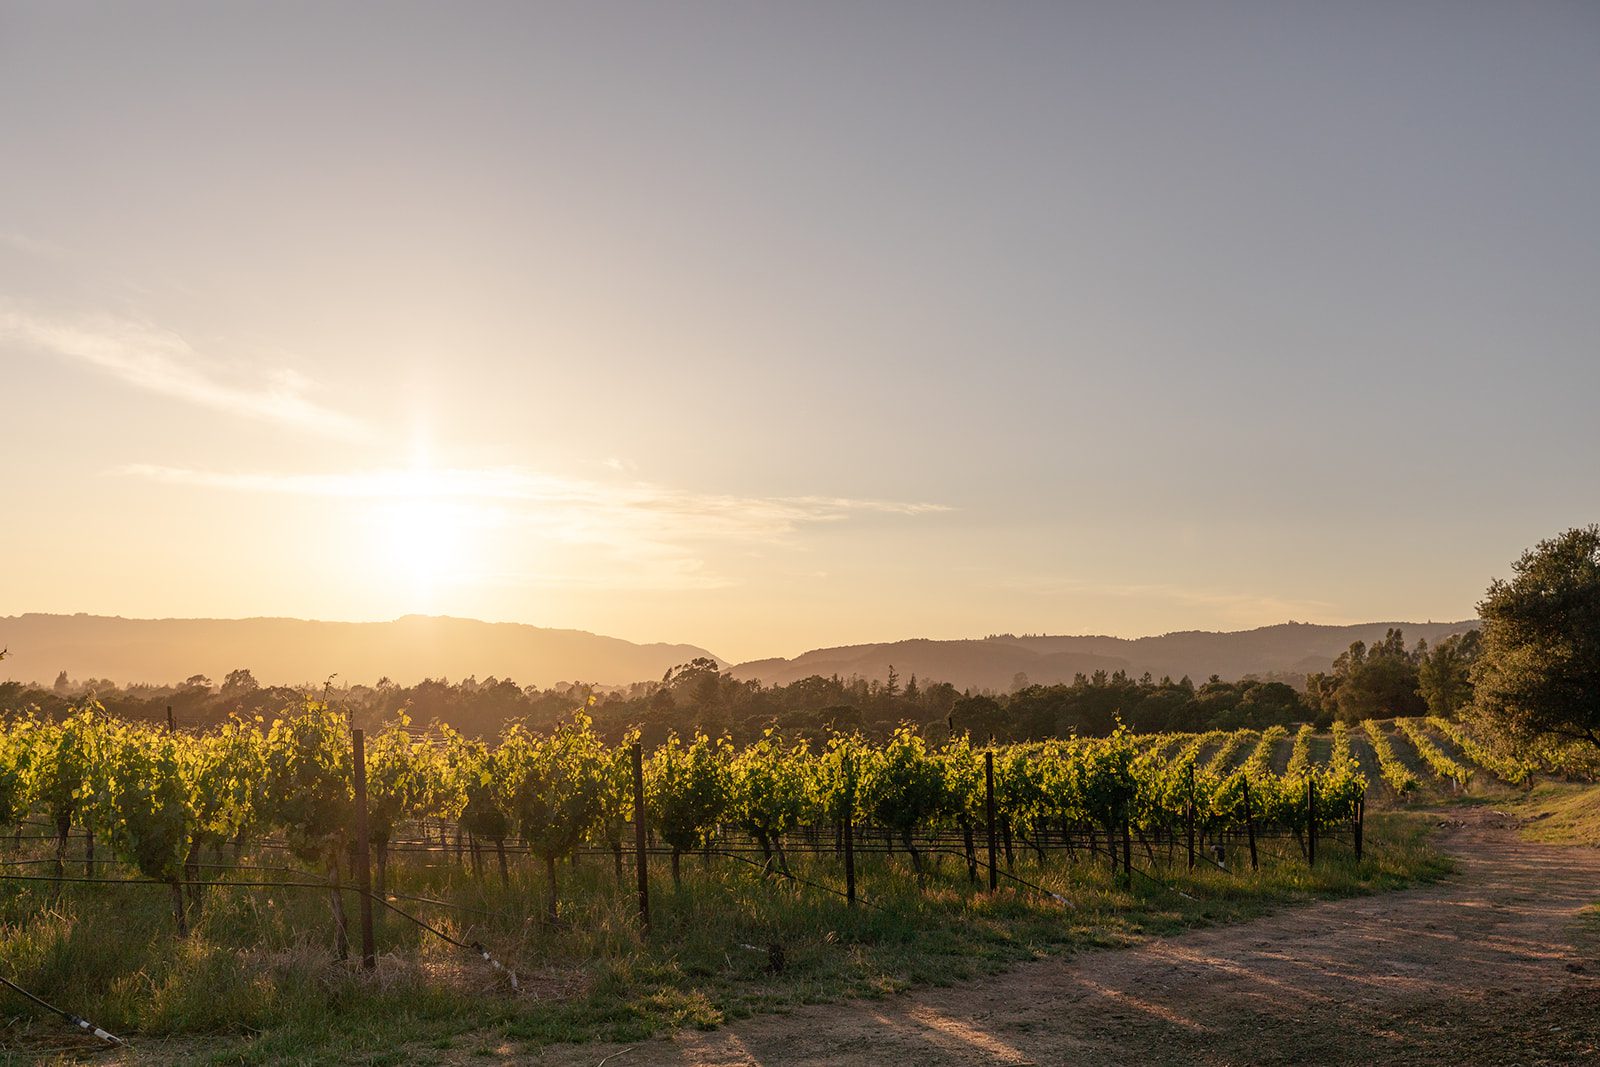 The sun is setting over a vineyard field.